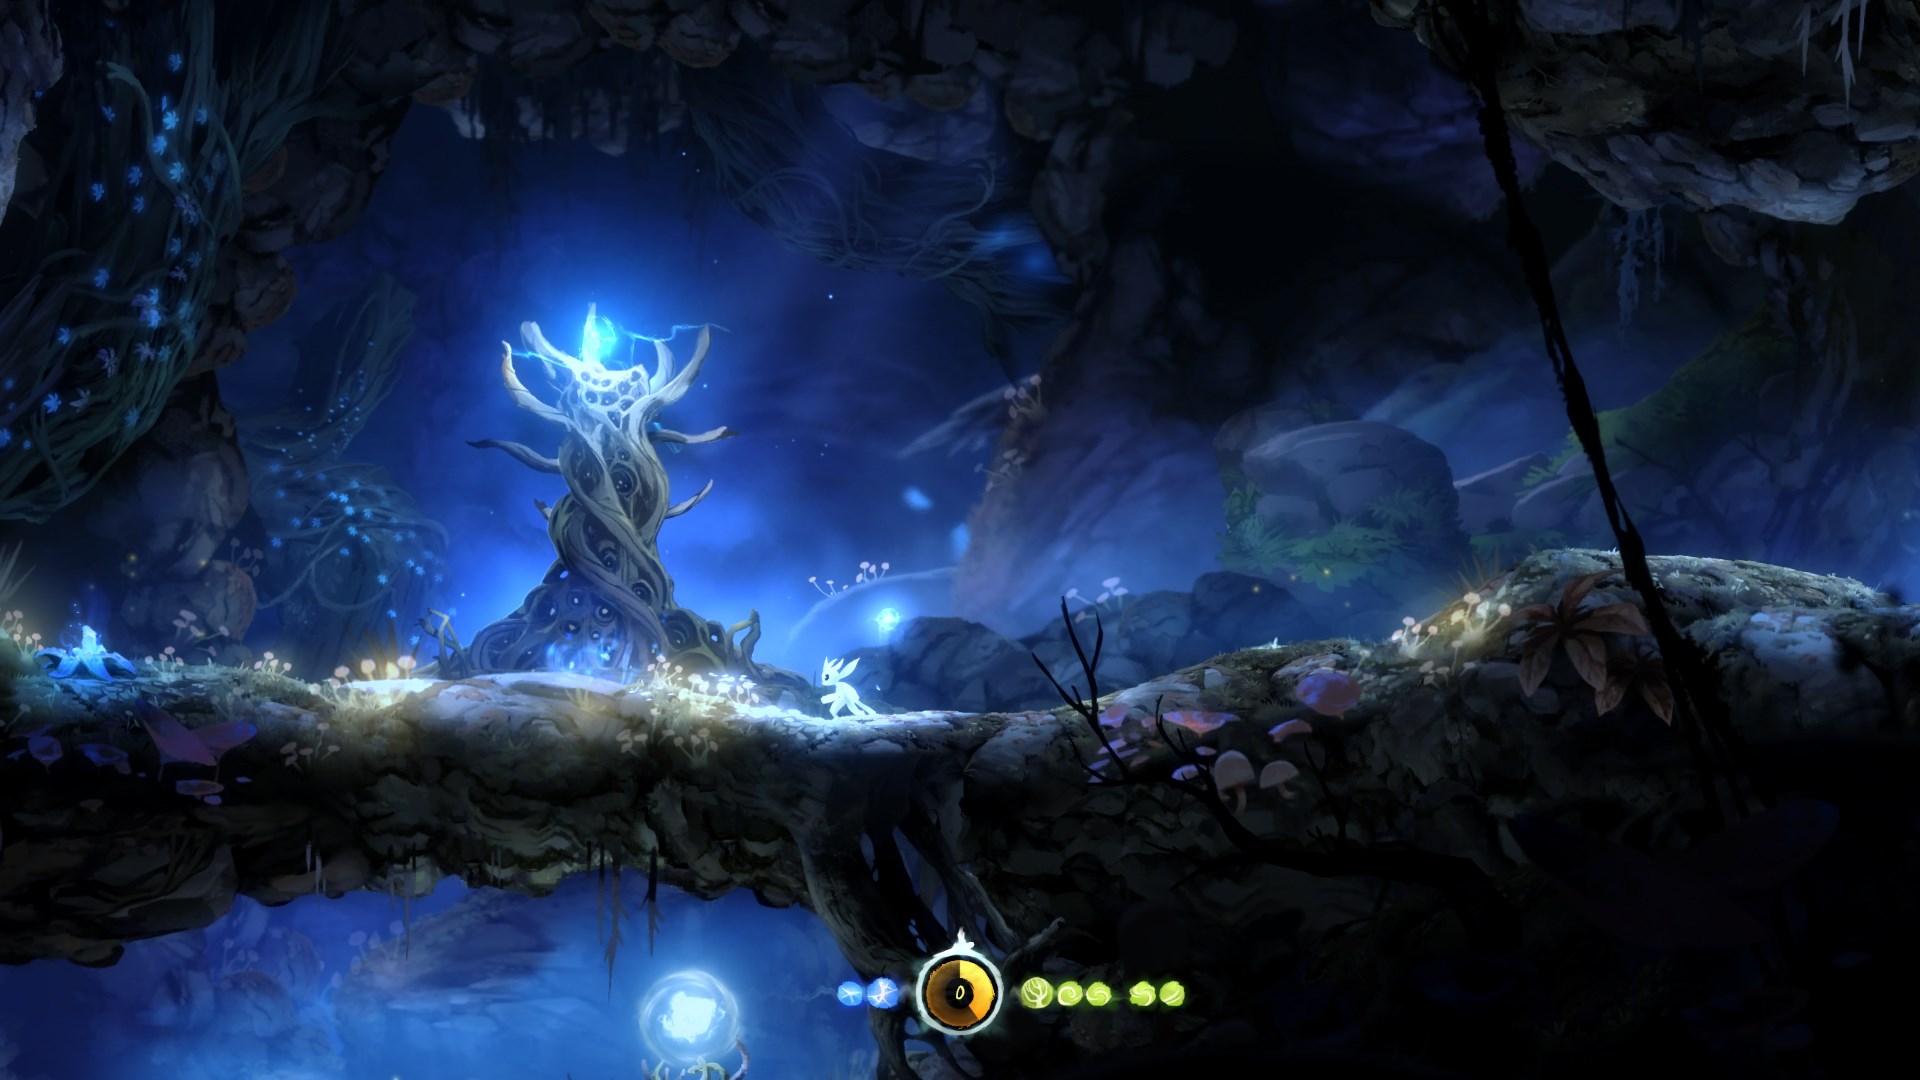 ori and the blind forest buy